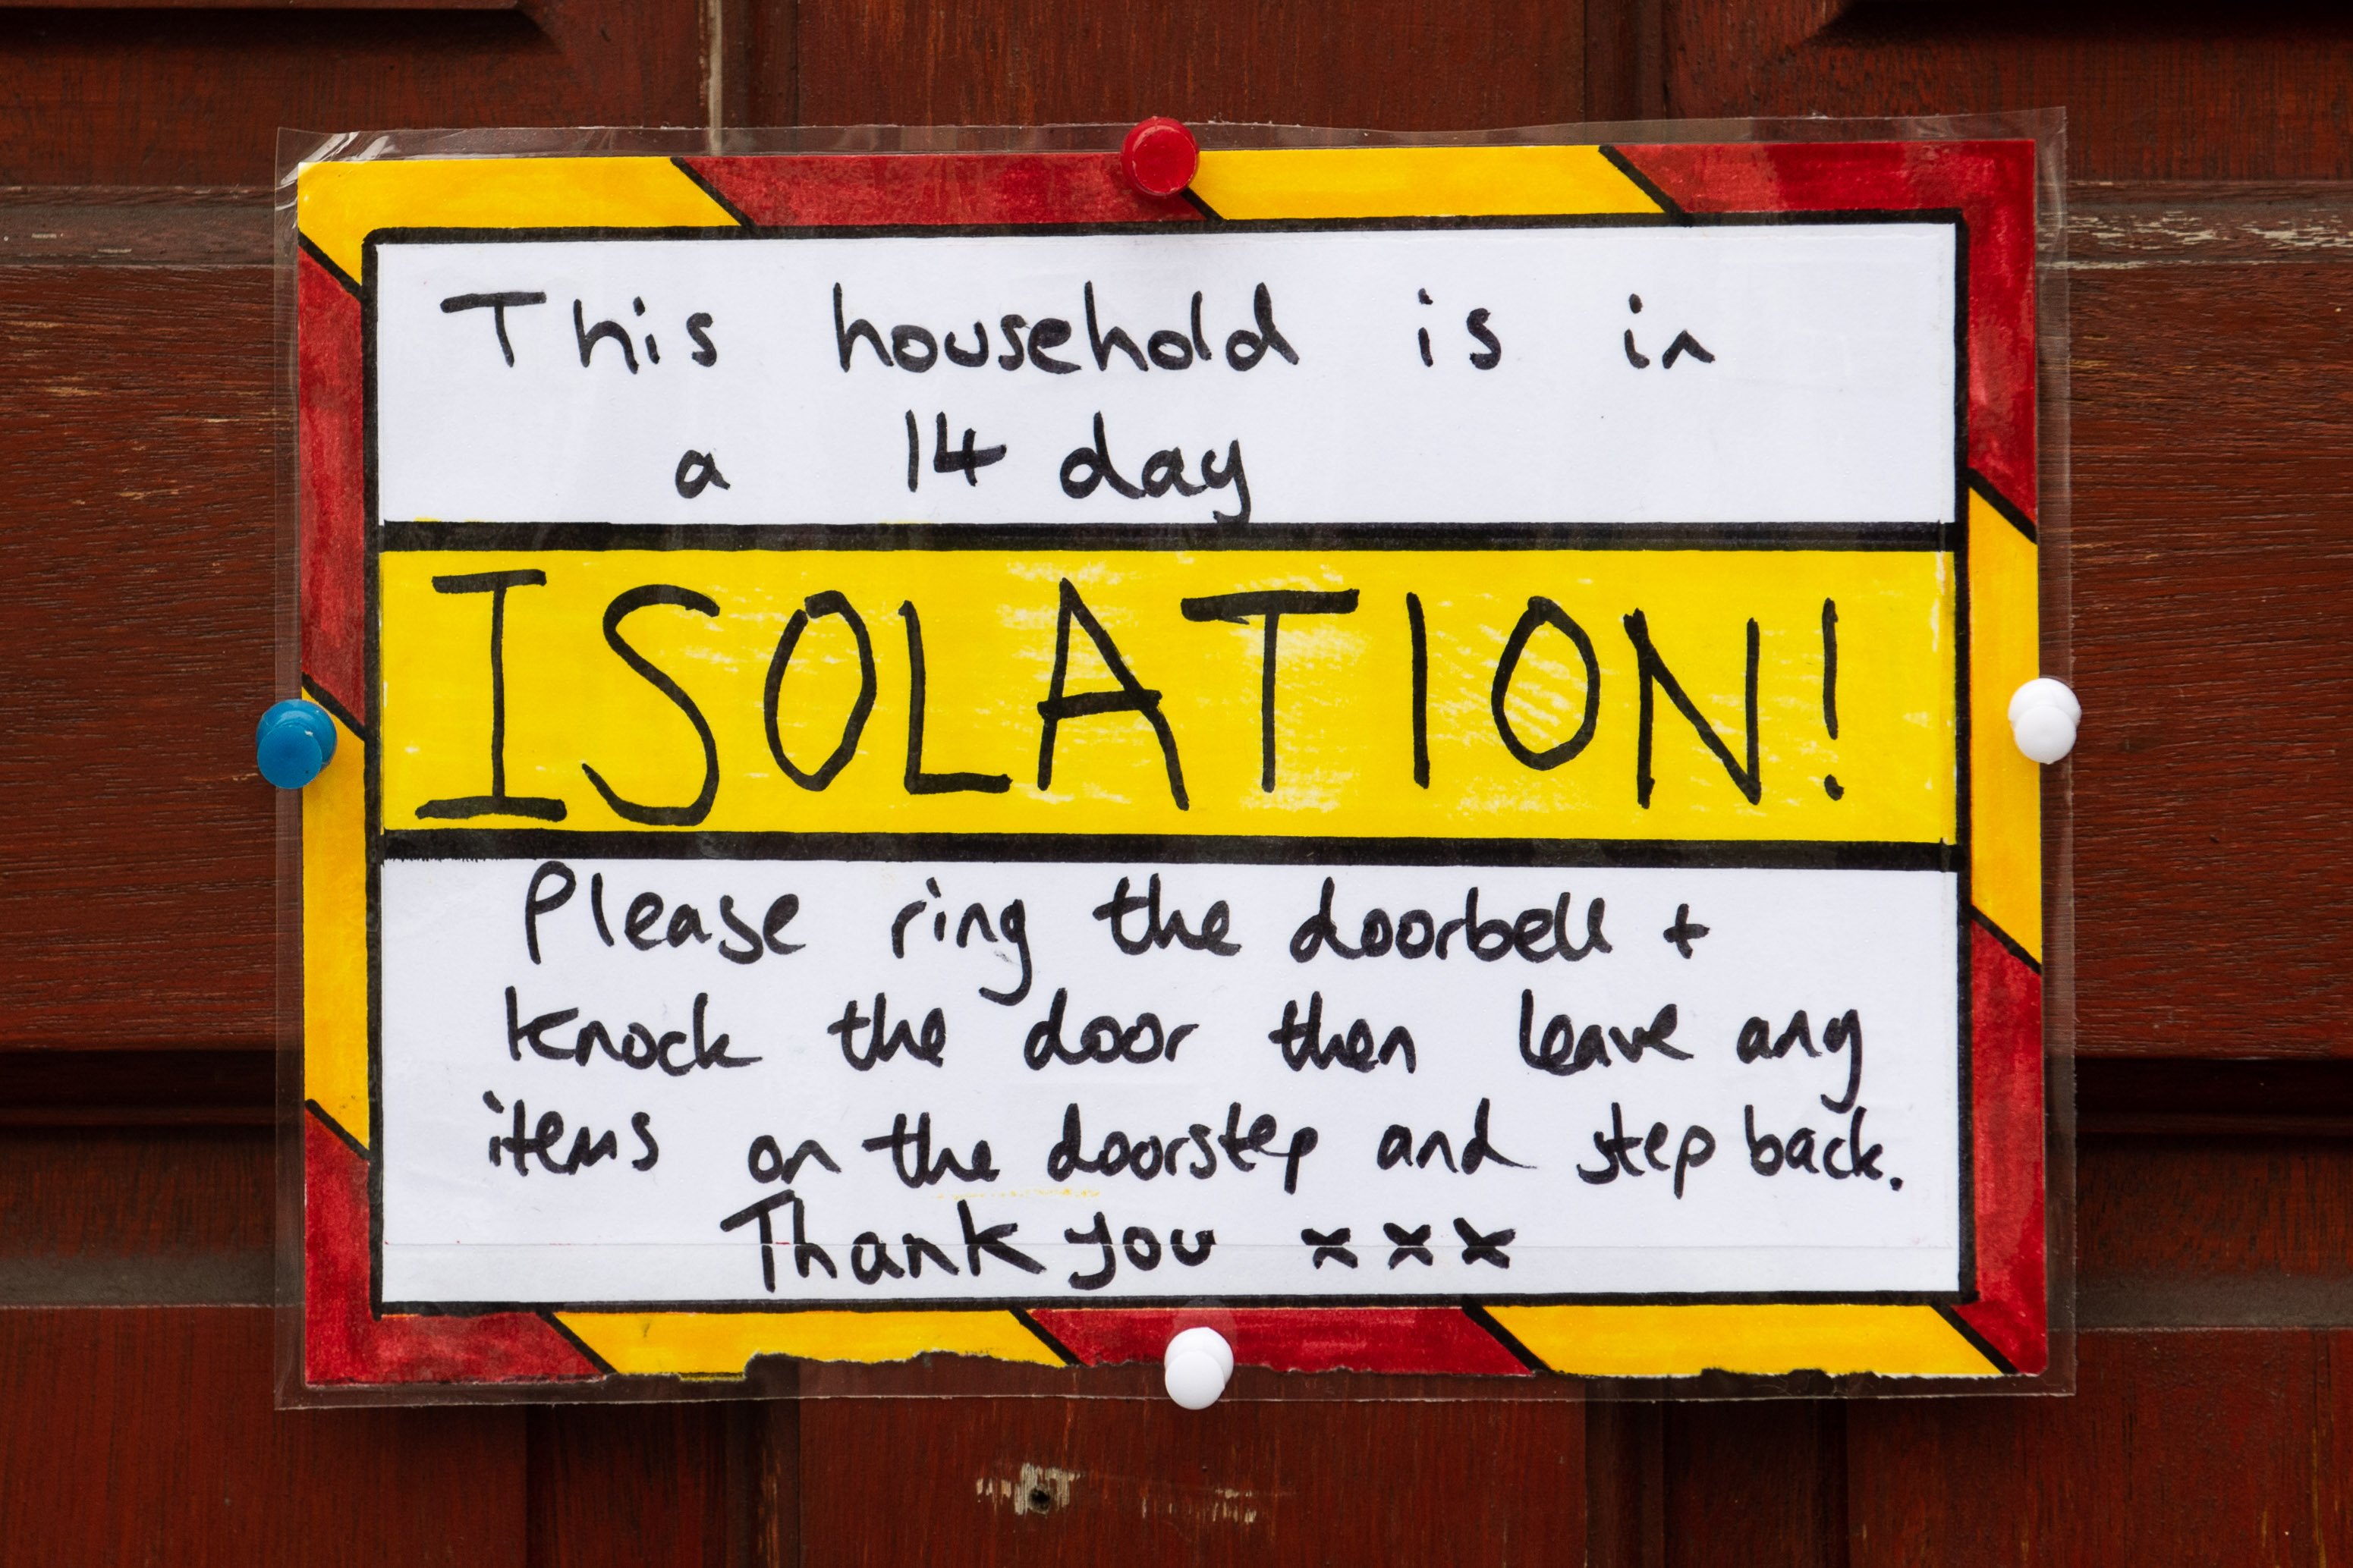  A sign on the door of a residential property where the household are in a 14 day isolation in accordance with new government guidelines on March 18, 2020 in Cardiff, United Kingdom. | Source: Getty Images